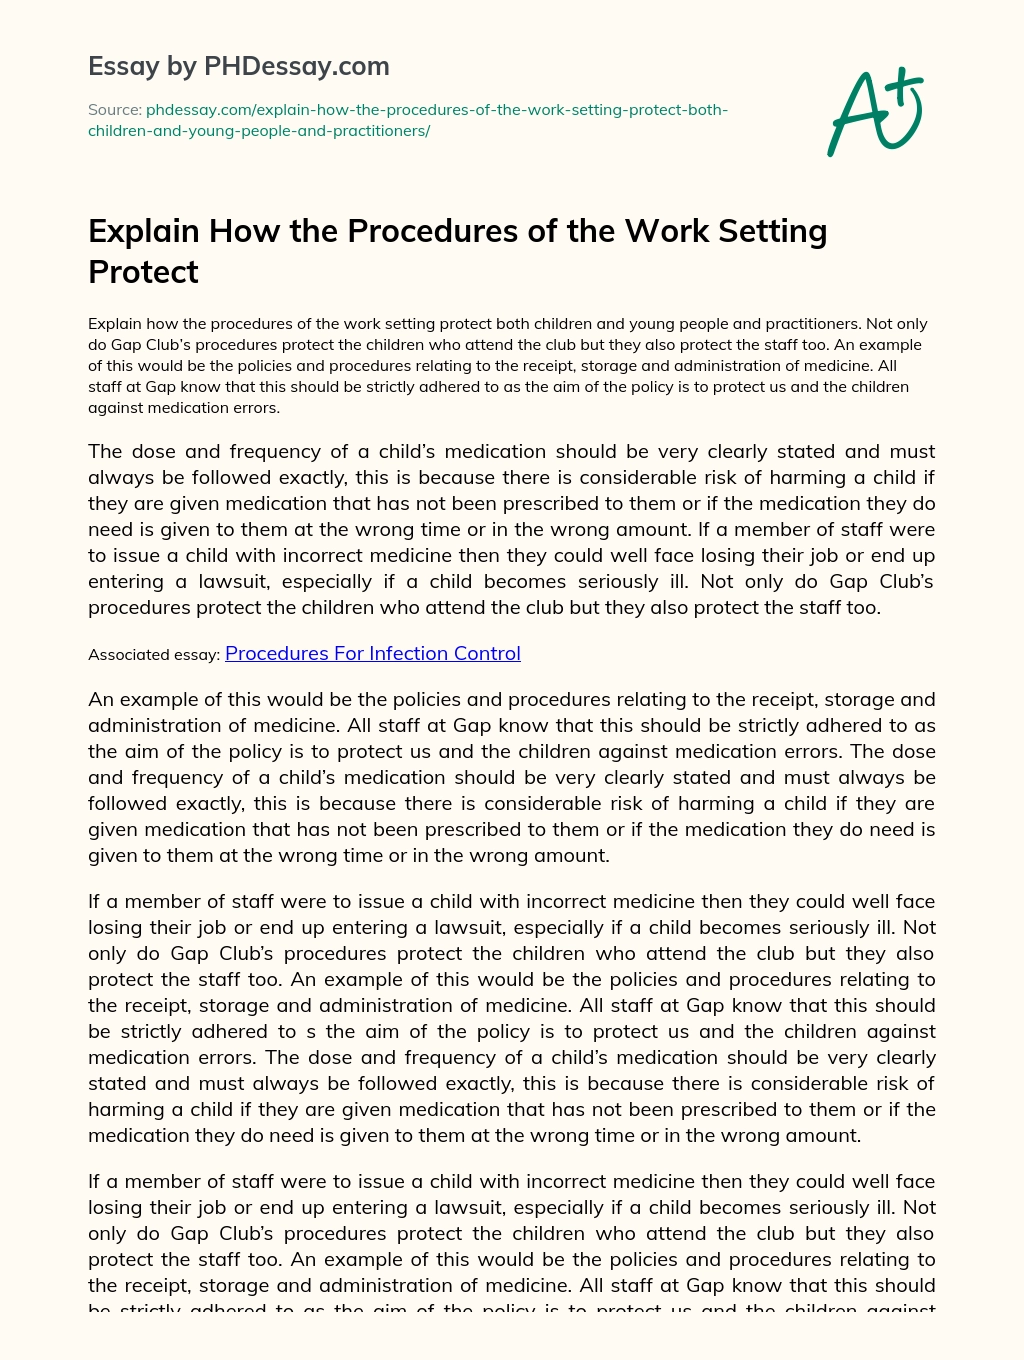 Explain How the Procedures of the Work Setting Protect essay